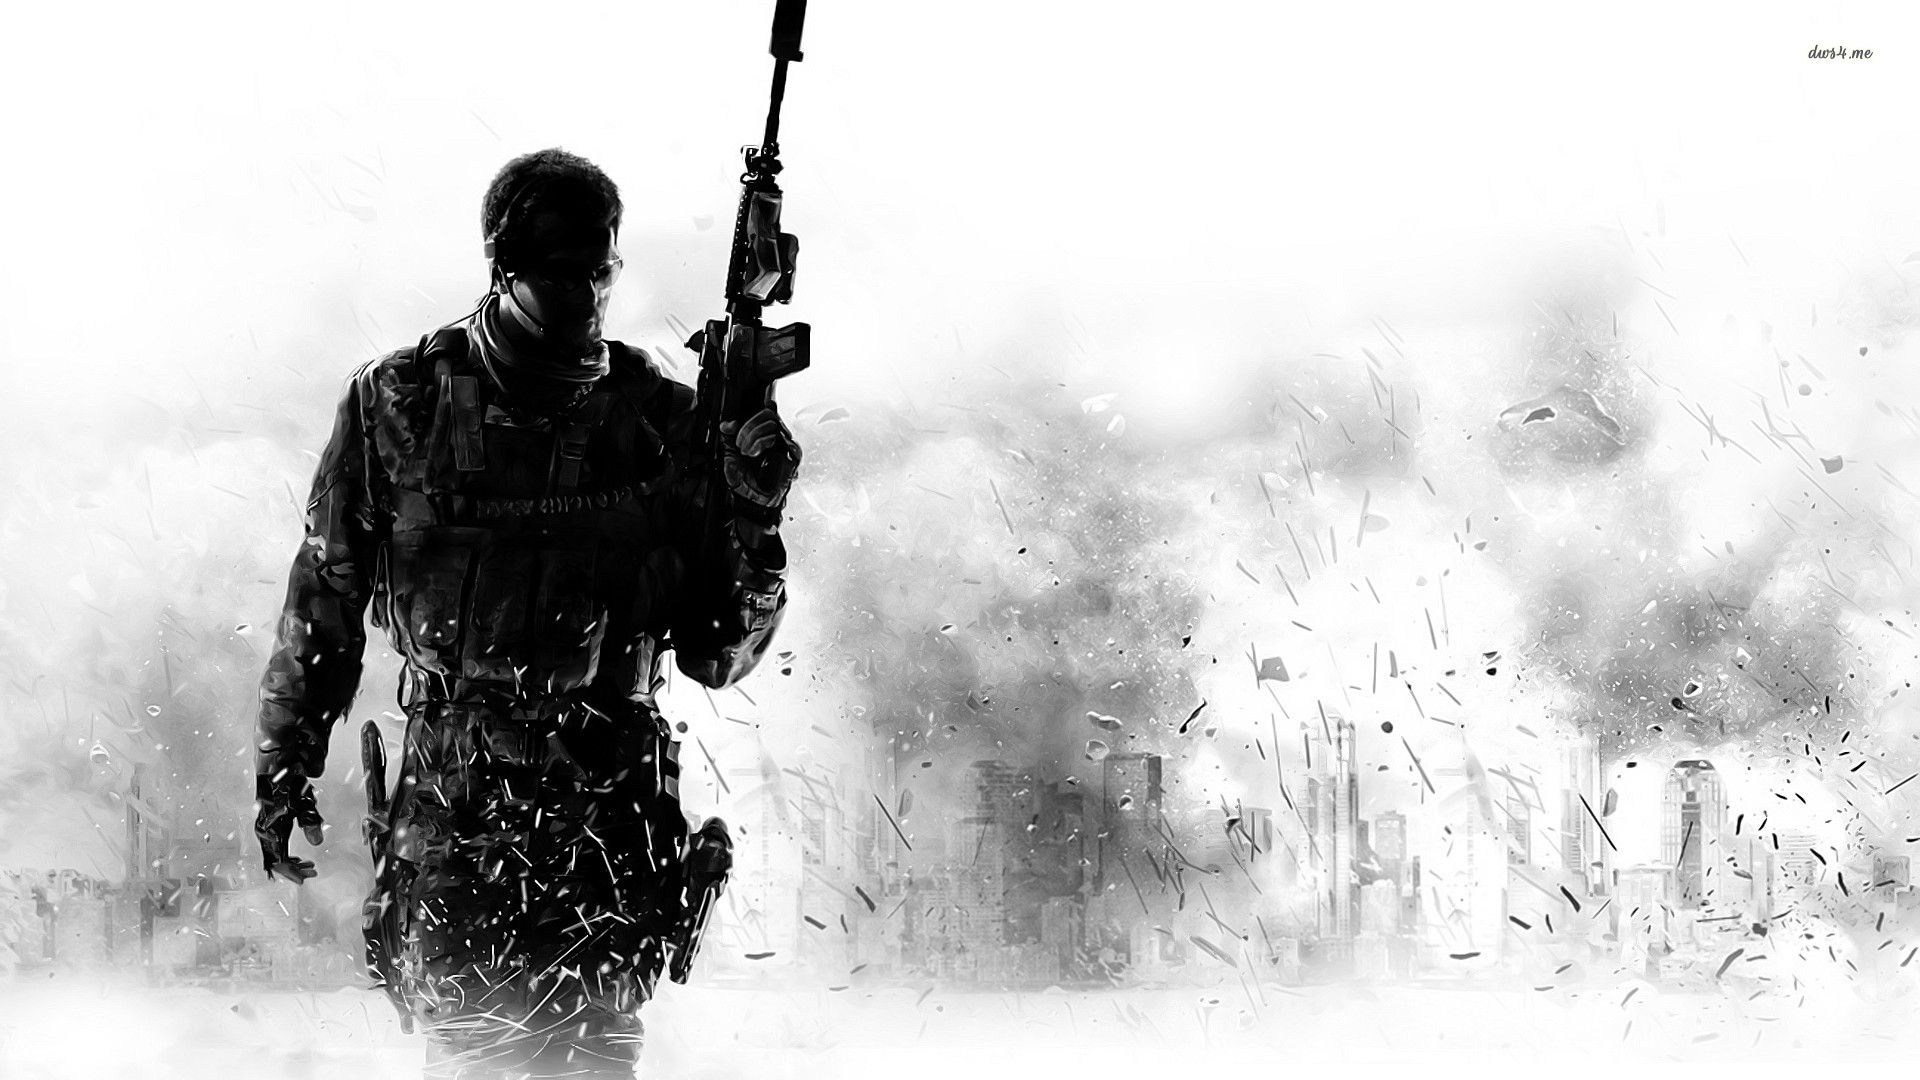 Call Of Duty Modern Warfare 3 4k Wallpaper,HD Games Wallpapers,4k  Wallpapers,Images,Backgrounds,Photos and Pictures